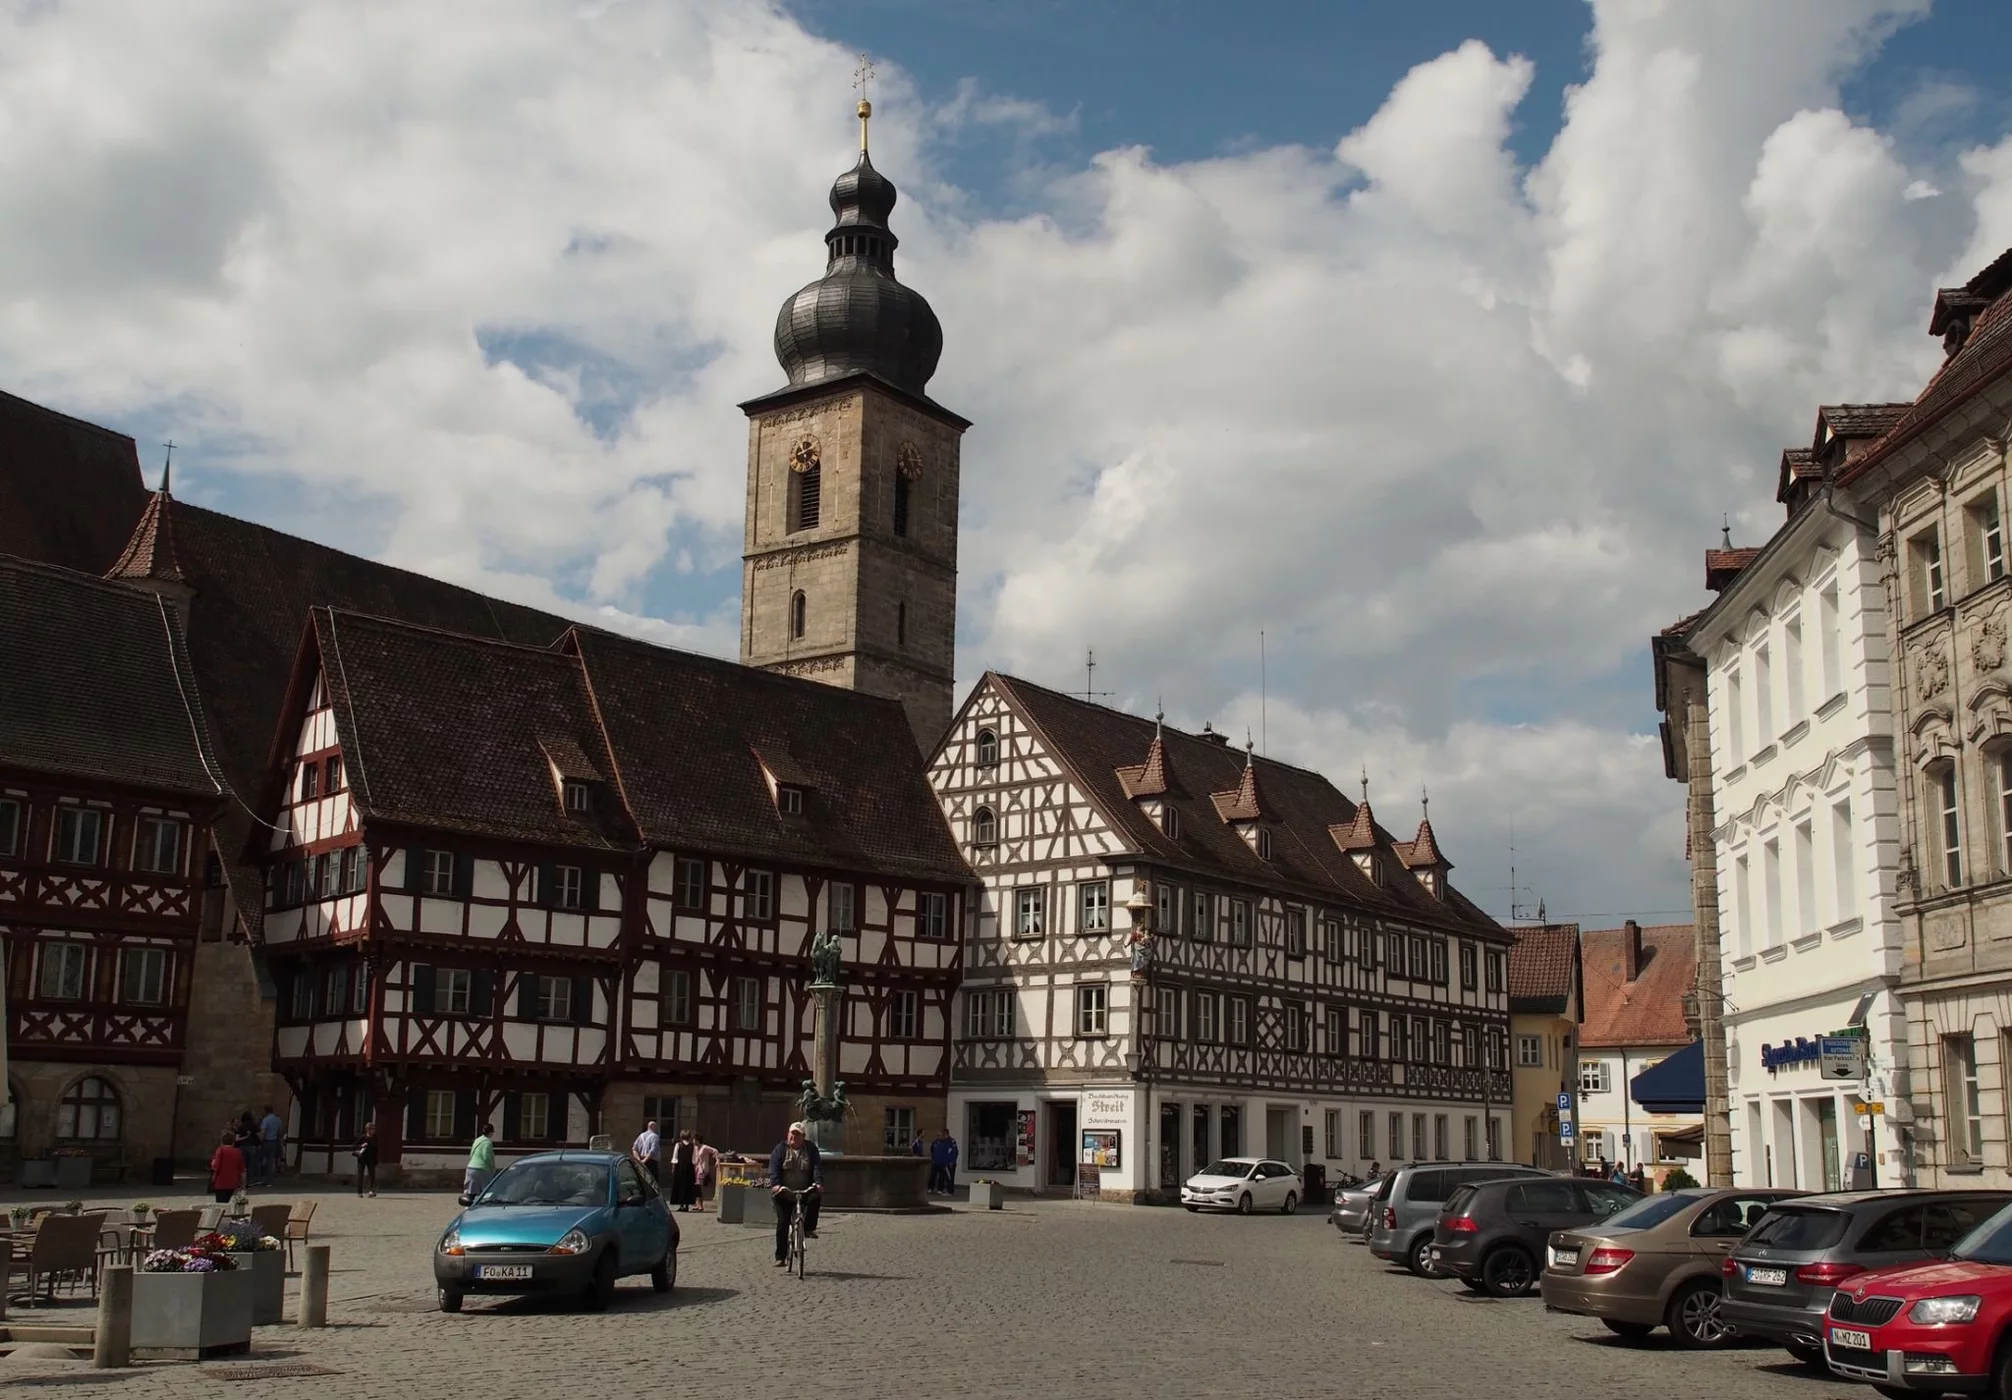 Old German Towns, Germany